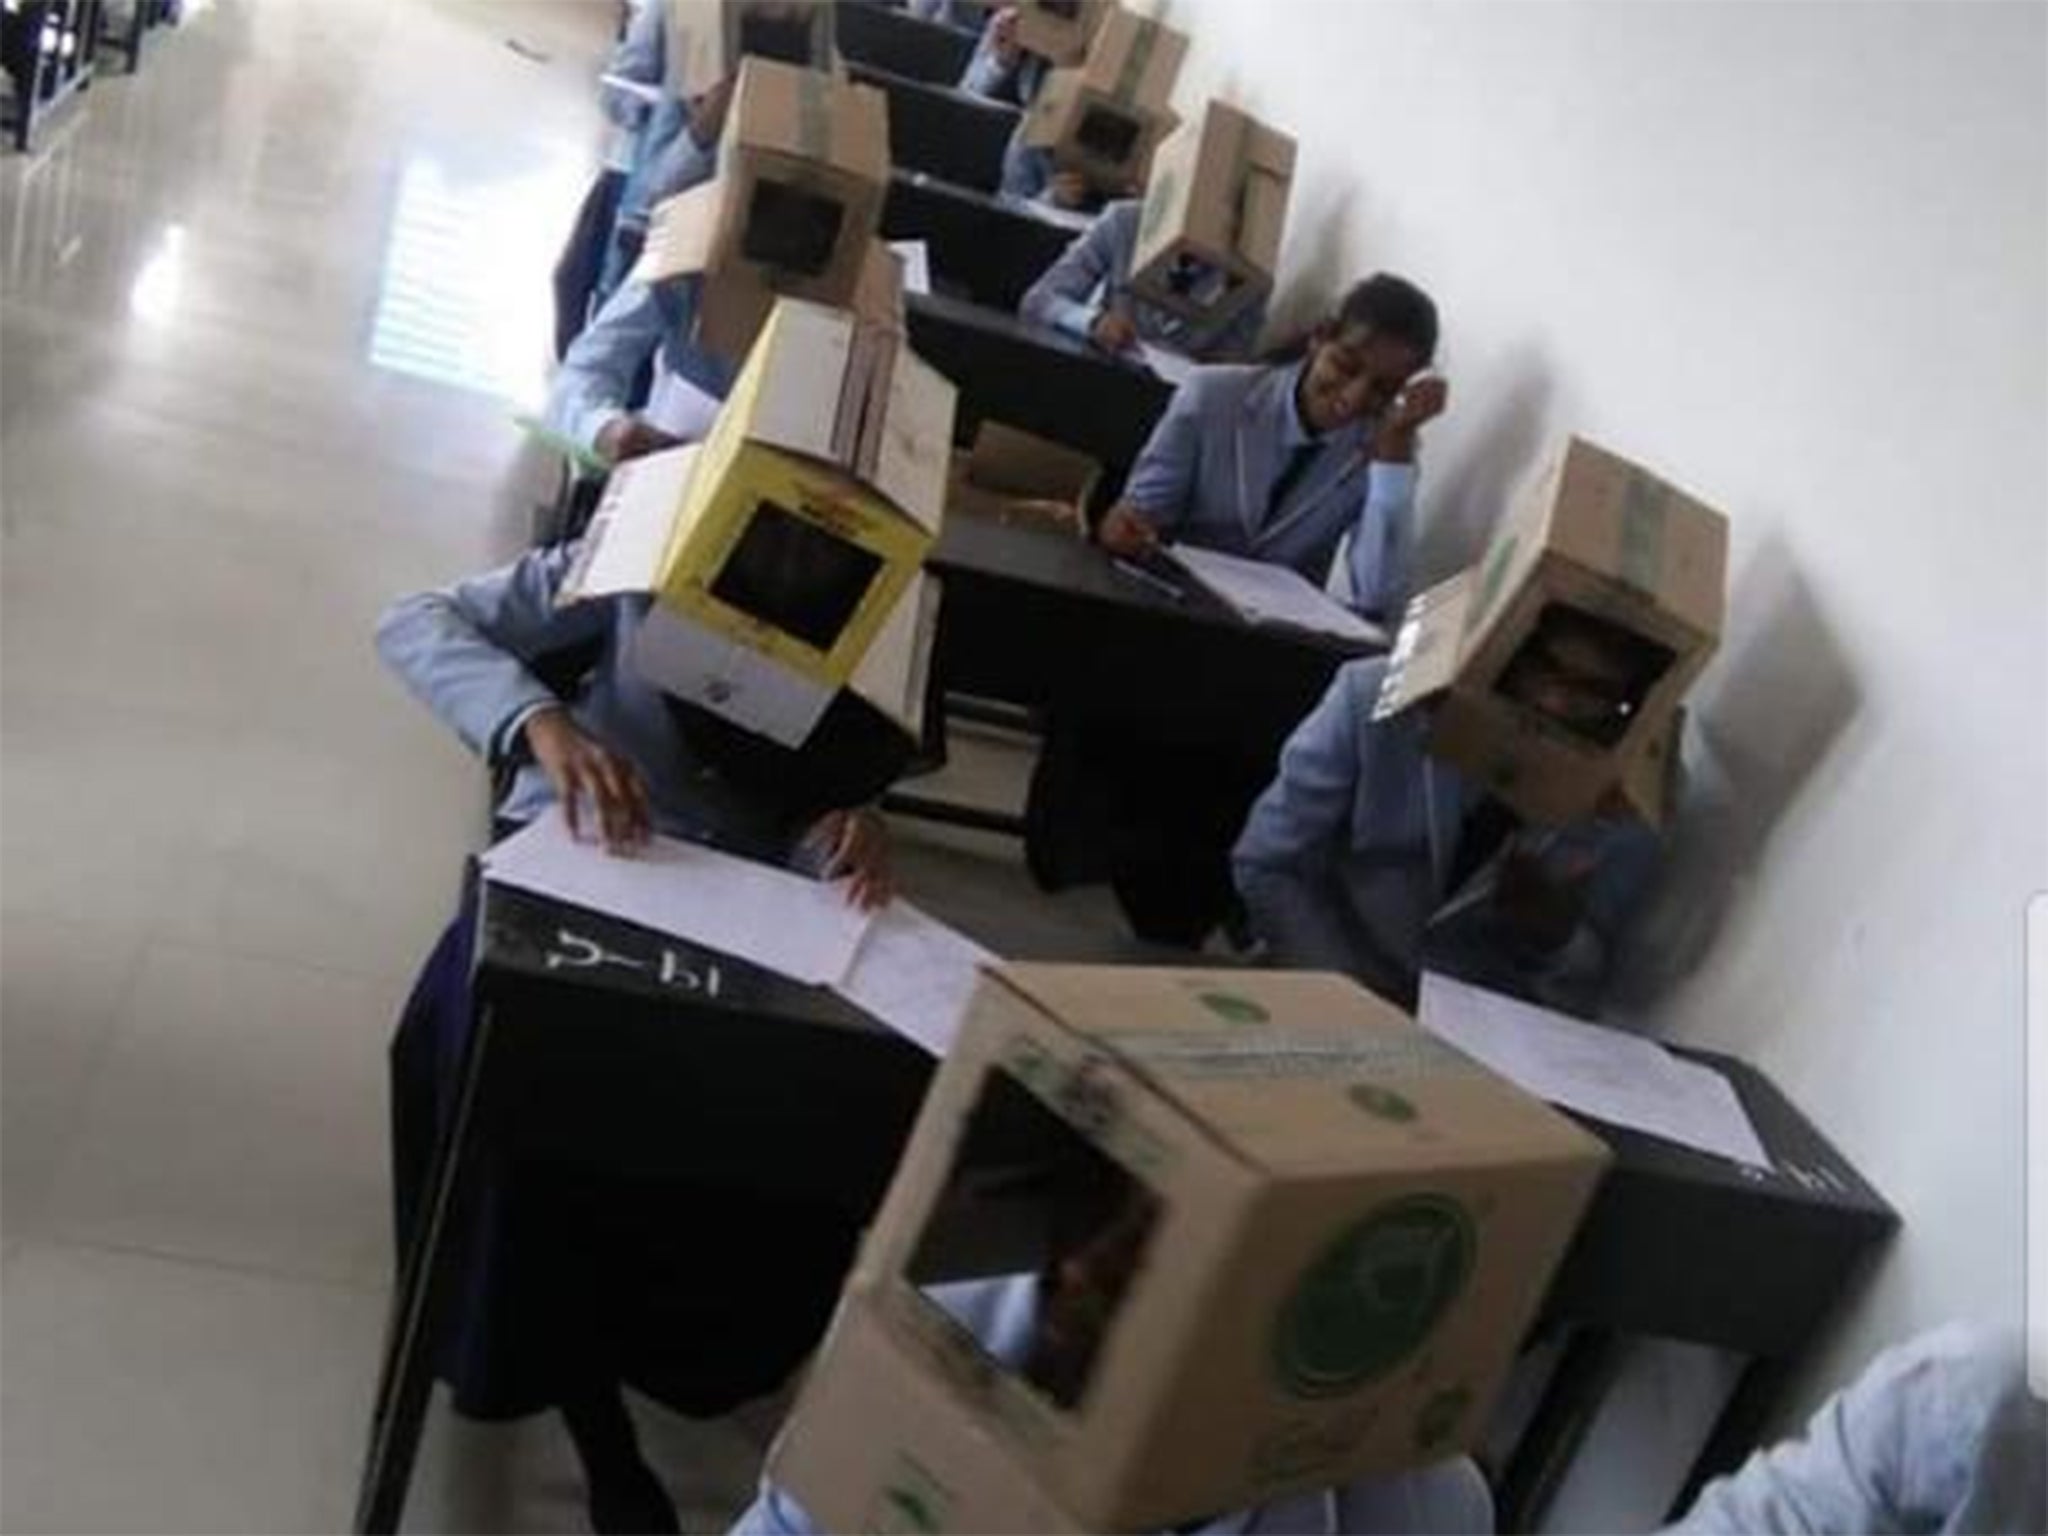 A junior college administrator said the students had consented to wearing the boxes and even brought their own